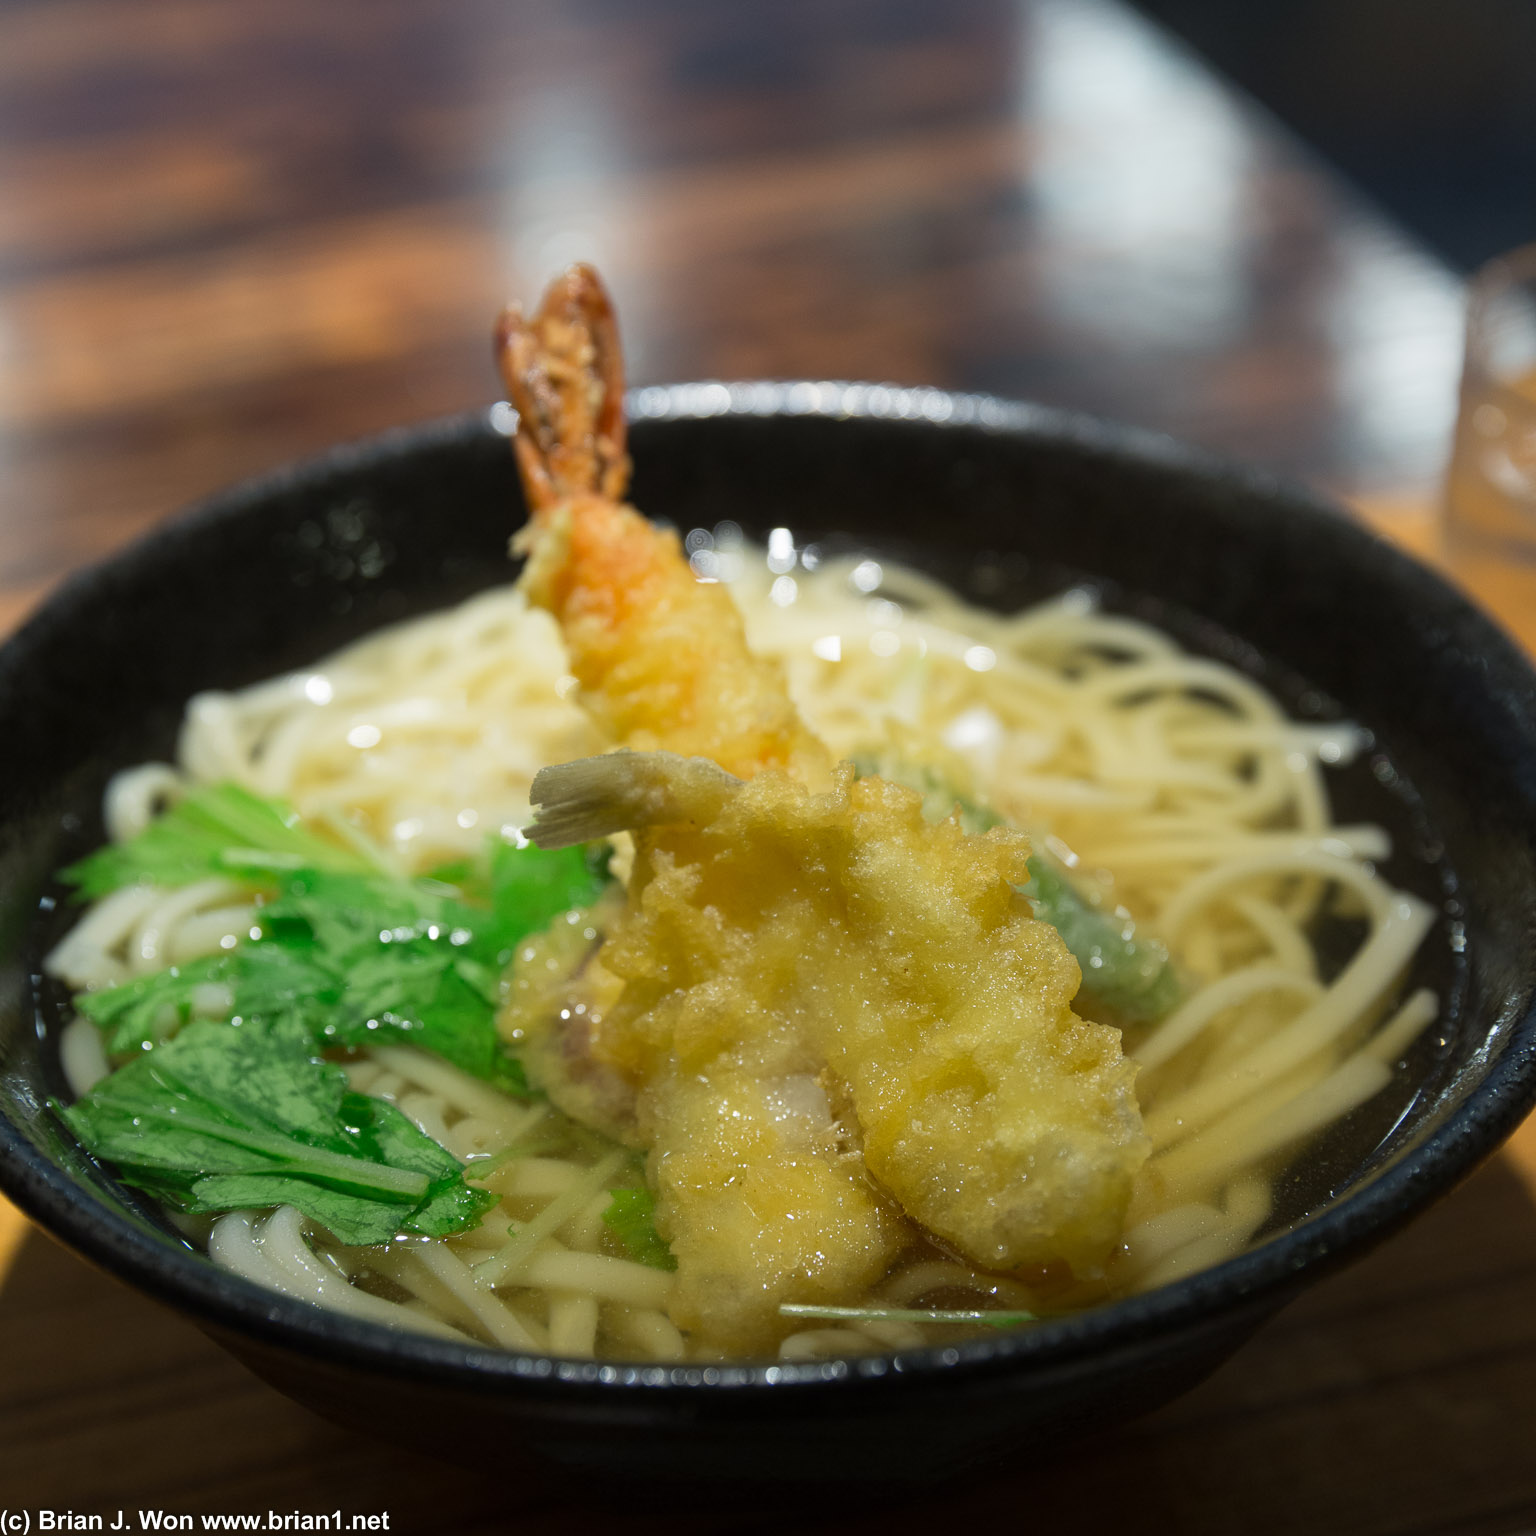 Tempura udon from Tatsu. Very light, almost flavorless broth. Hey, it was better than food in the club.